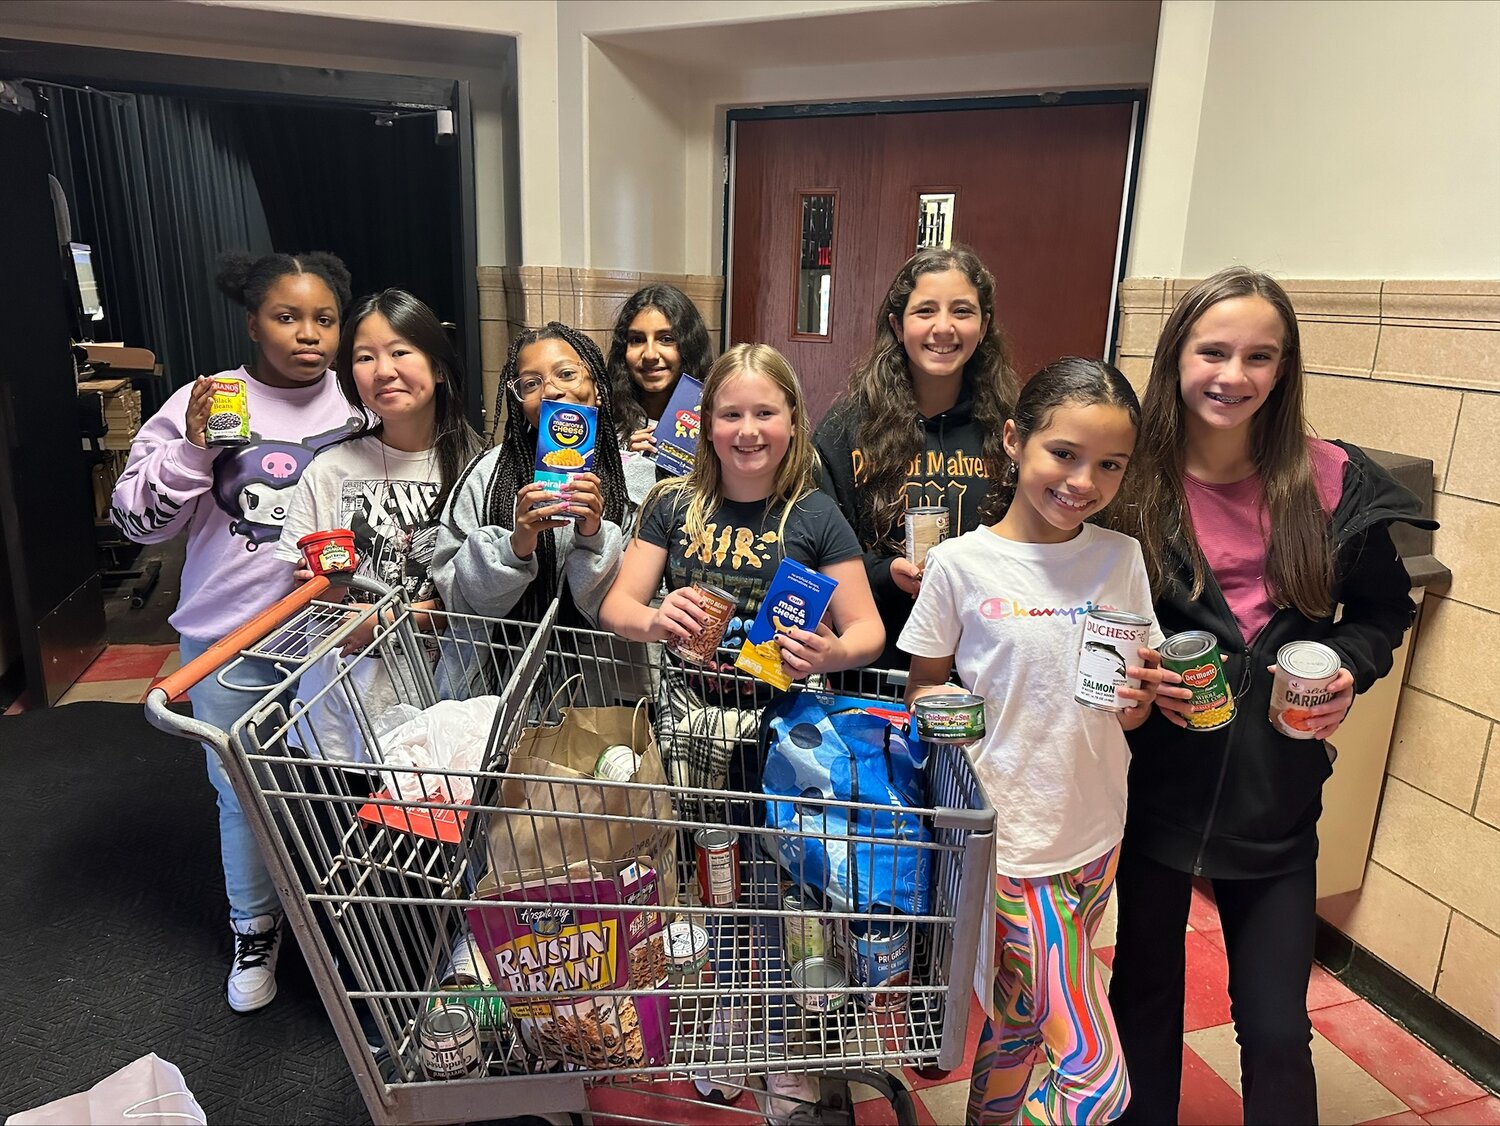 The sixth grade Advisory and Community Service Club at Howard T. Herber Middle School held a food drive benefitting the Interfaith Nutrition Network, or I.N.N, in Hempstead. The kids’ donations will help people struggling with food insecurity or homelessness.